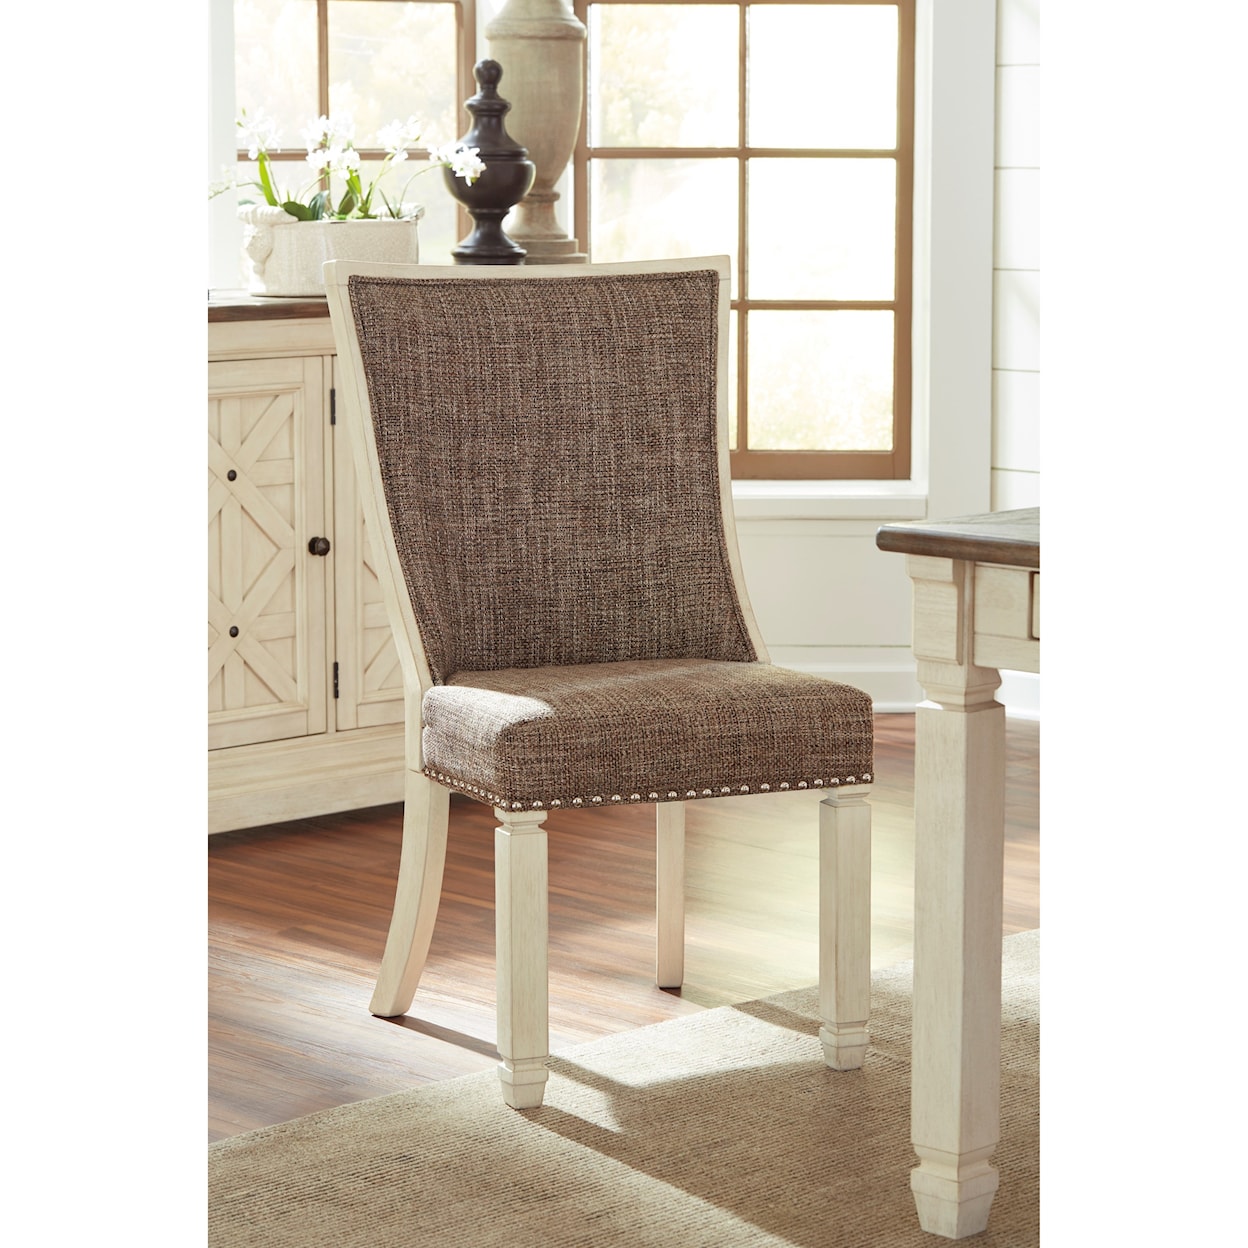 Signature Bolanburg Upholstered Side Chair